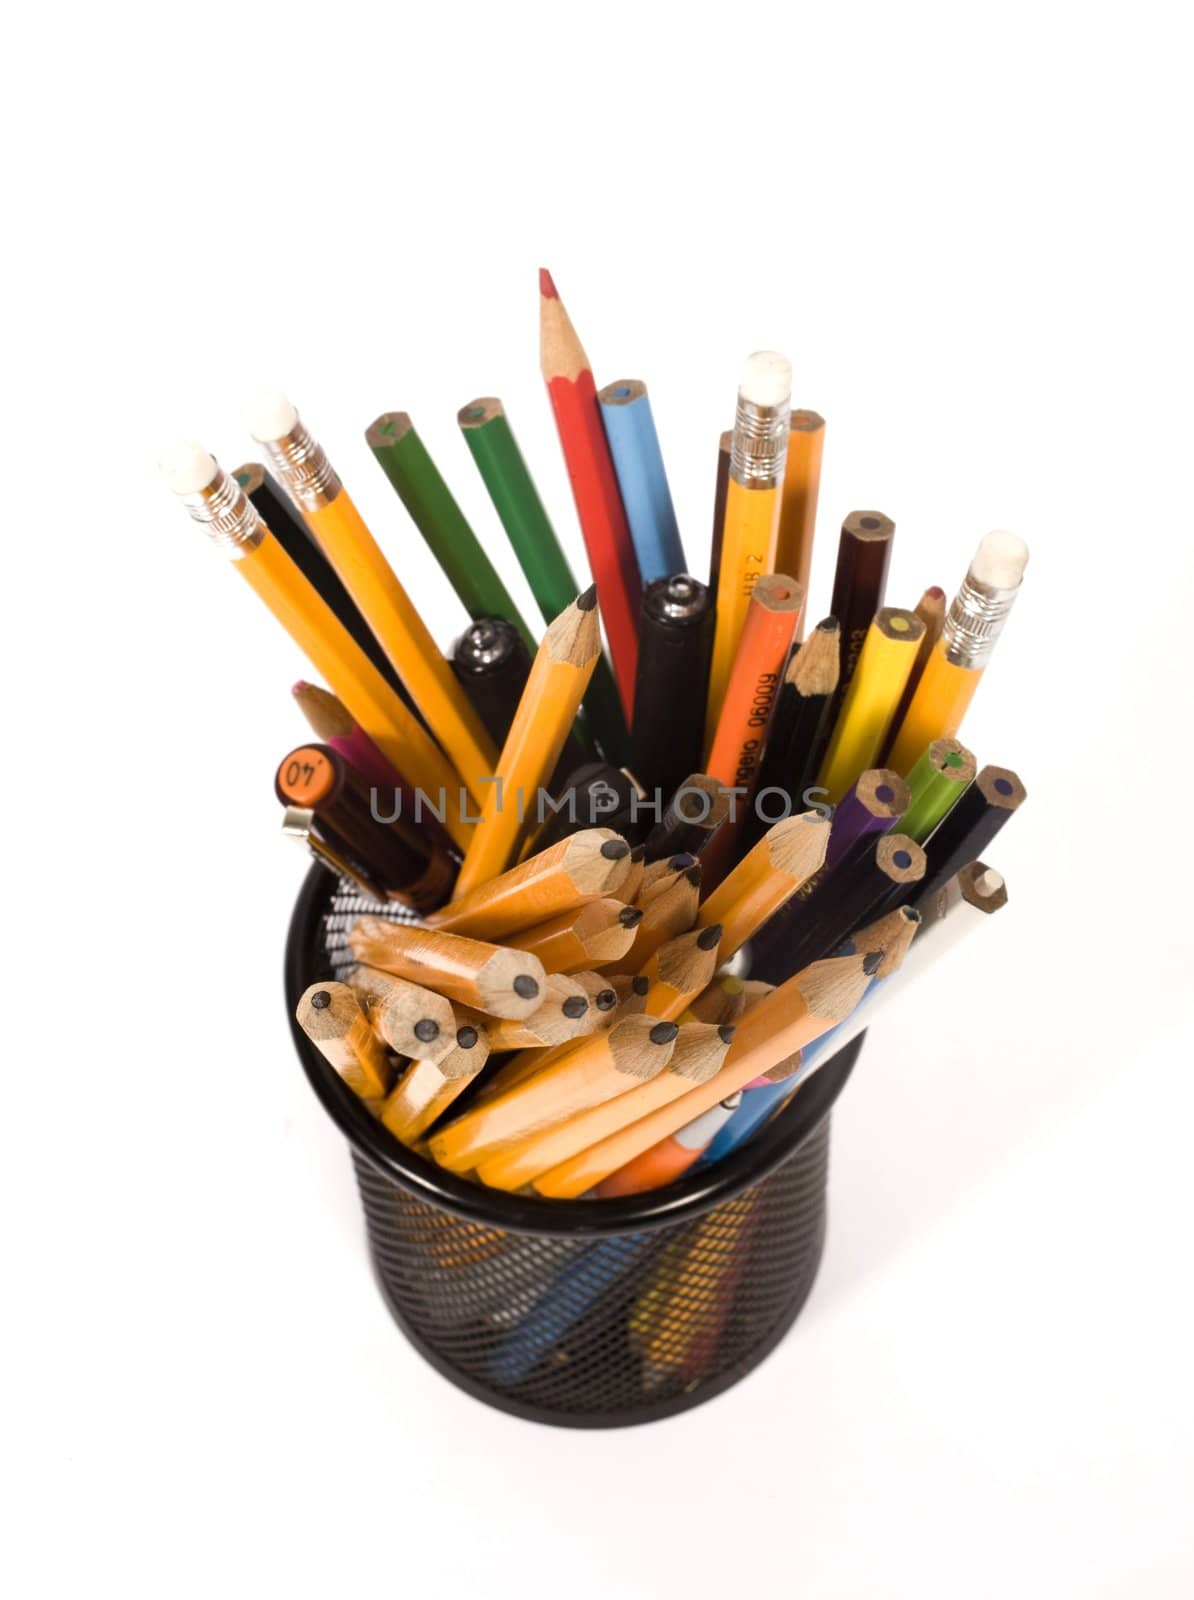 pencil holder on isolated background

